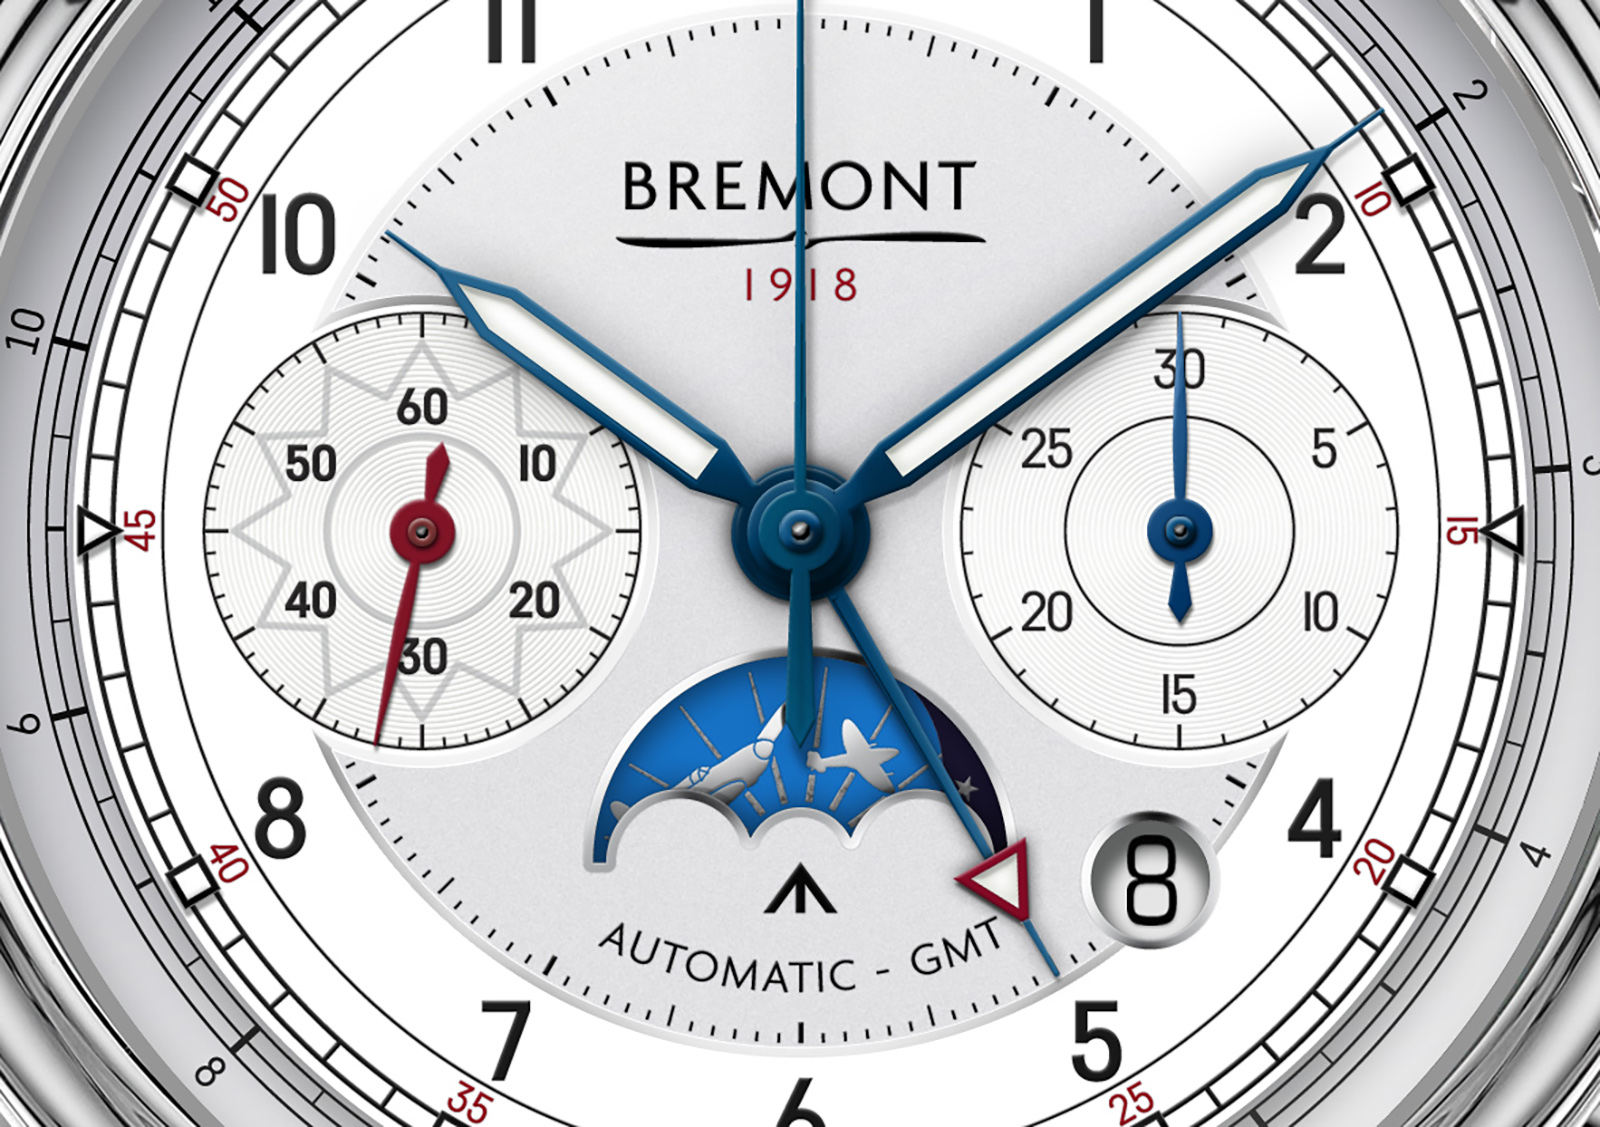 Bremont 1918 Limited Edition Chronograph 2